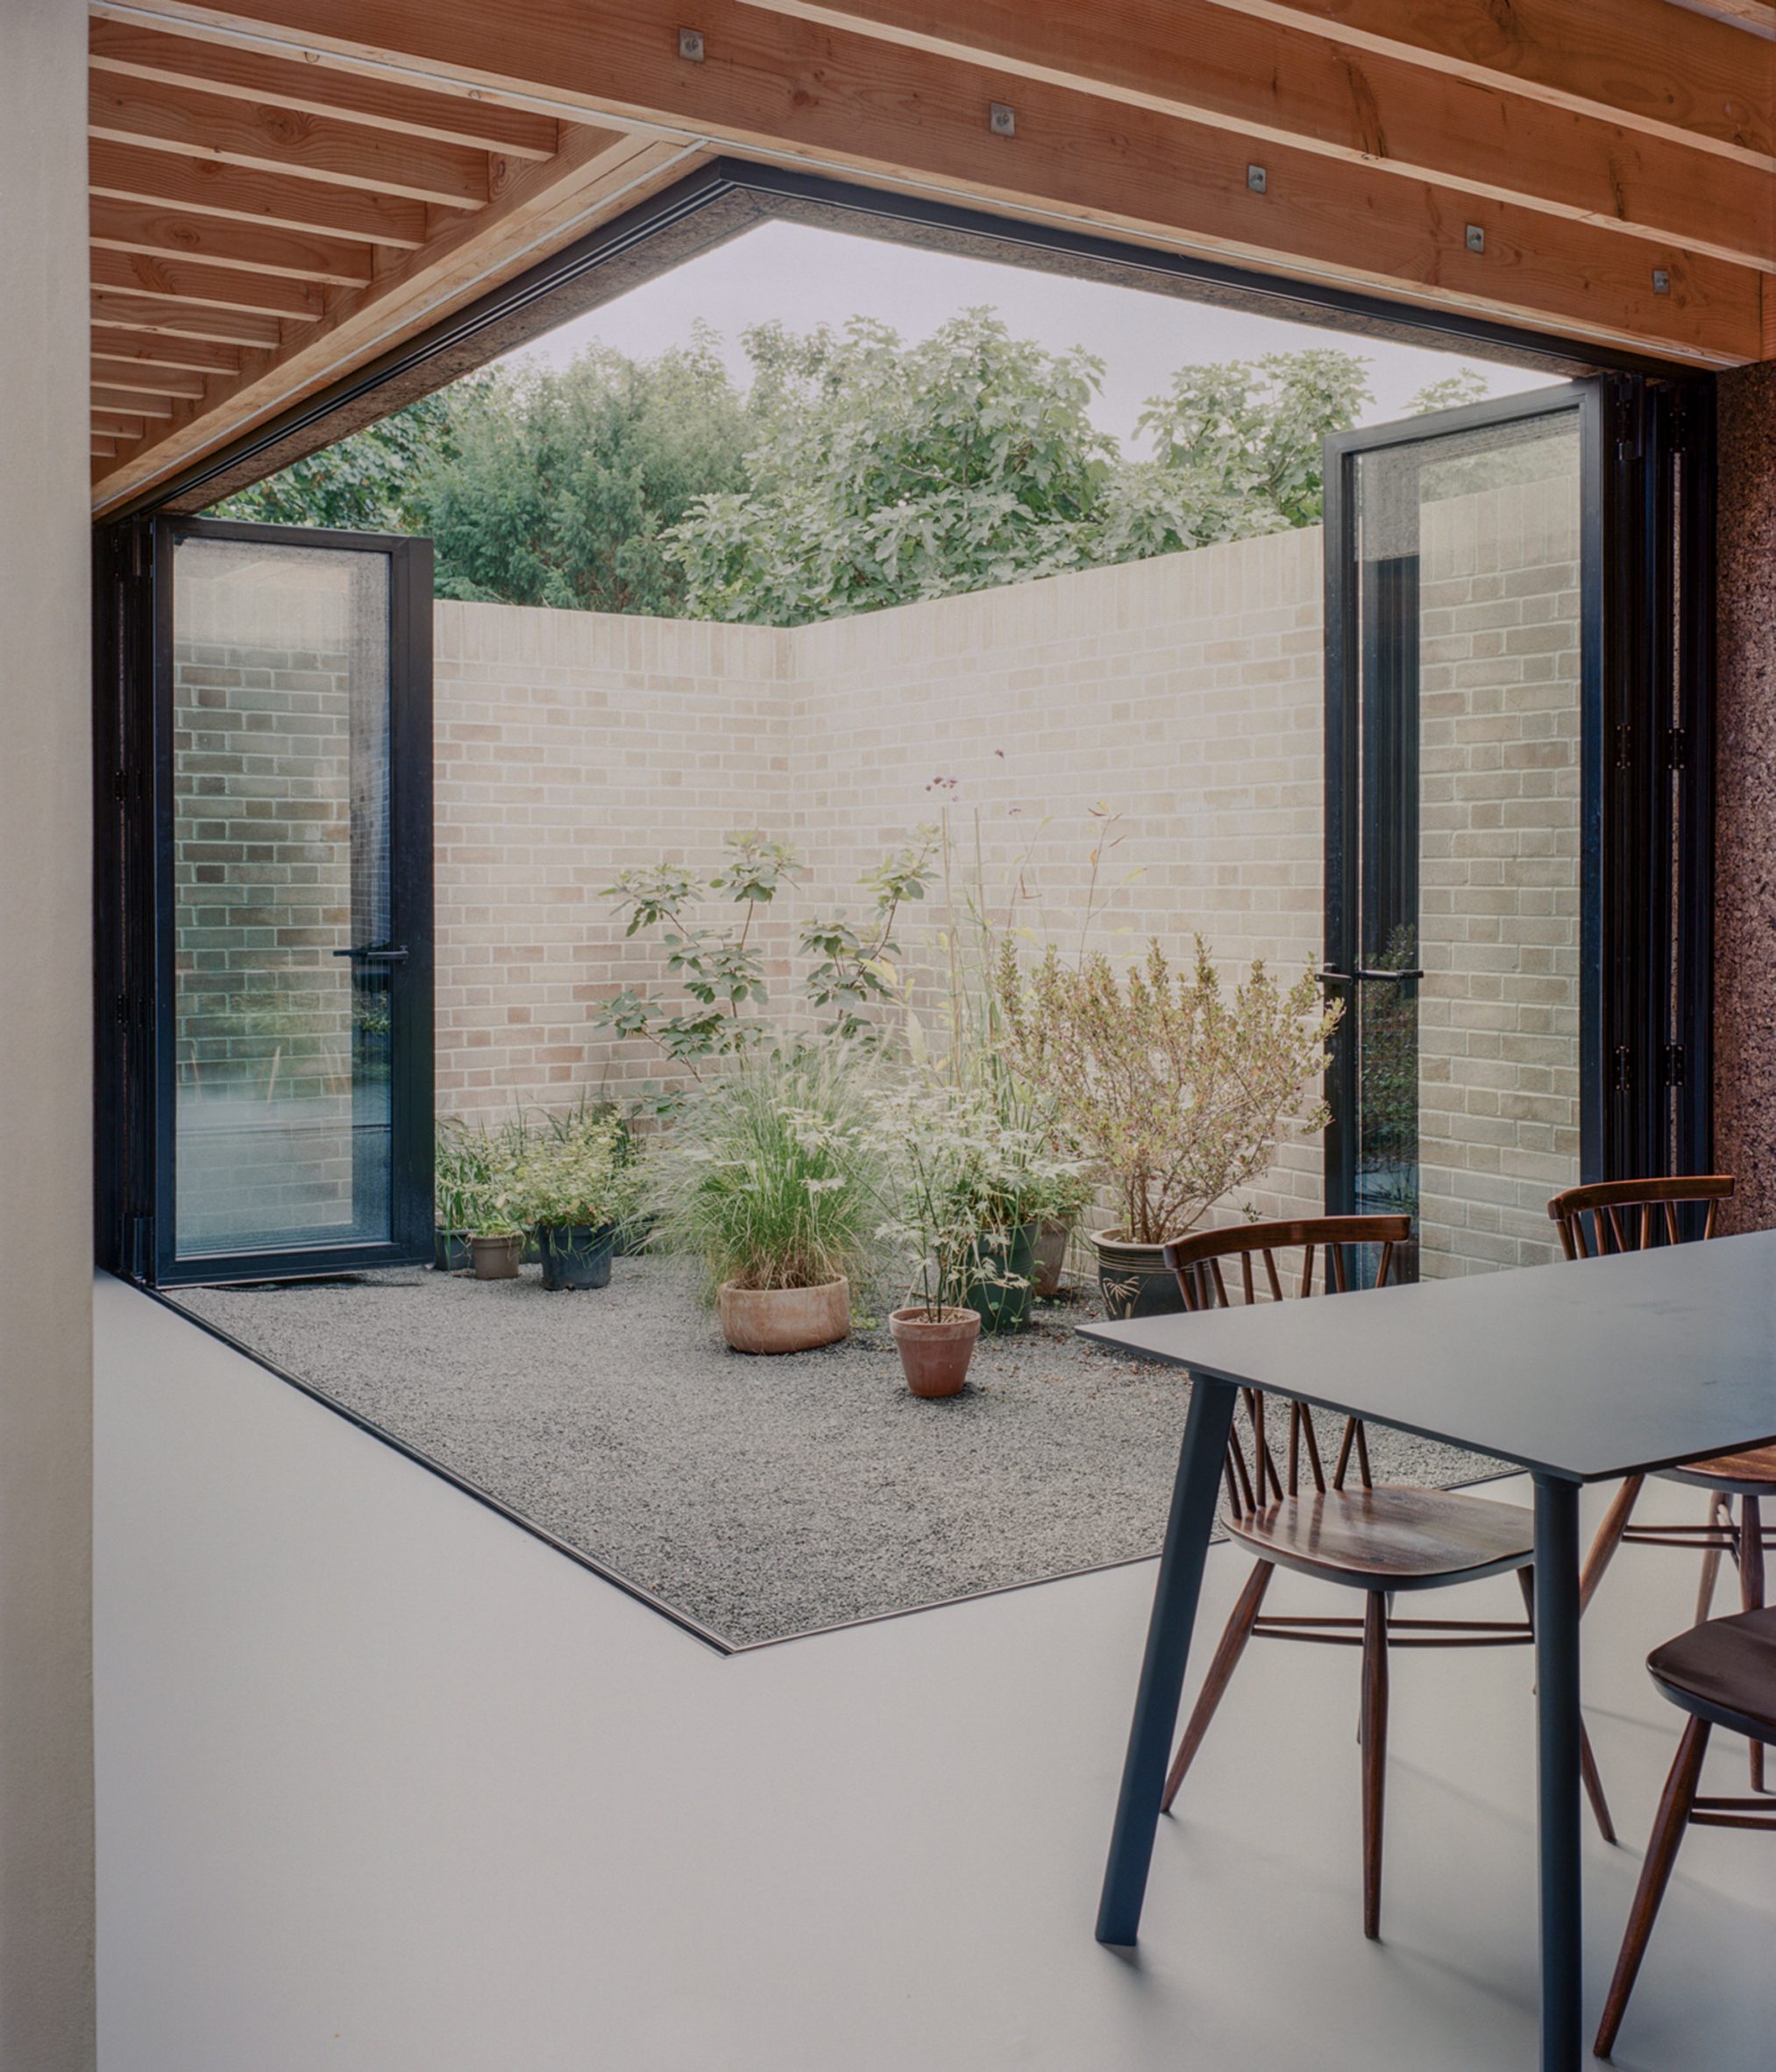 Image of bi-folding doors that open out to a garden